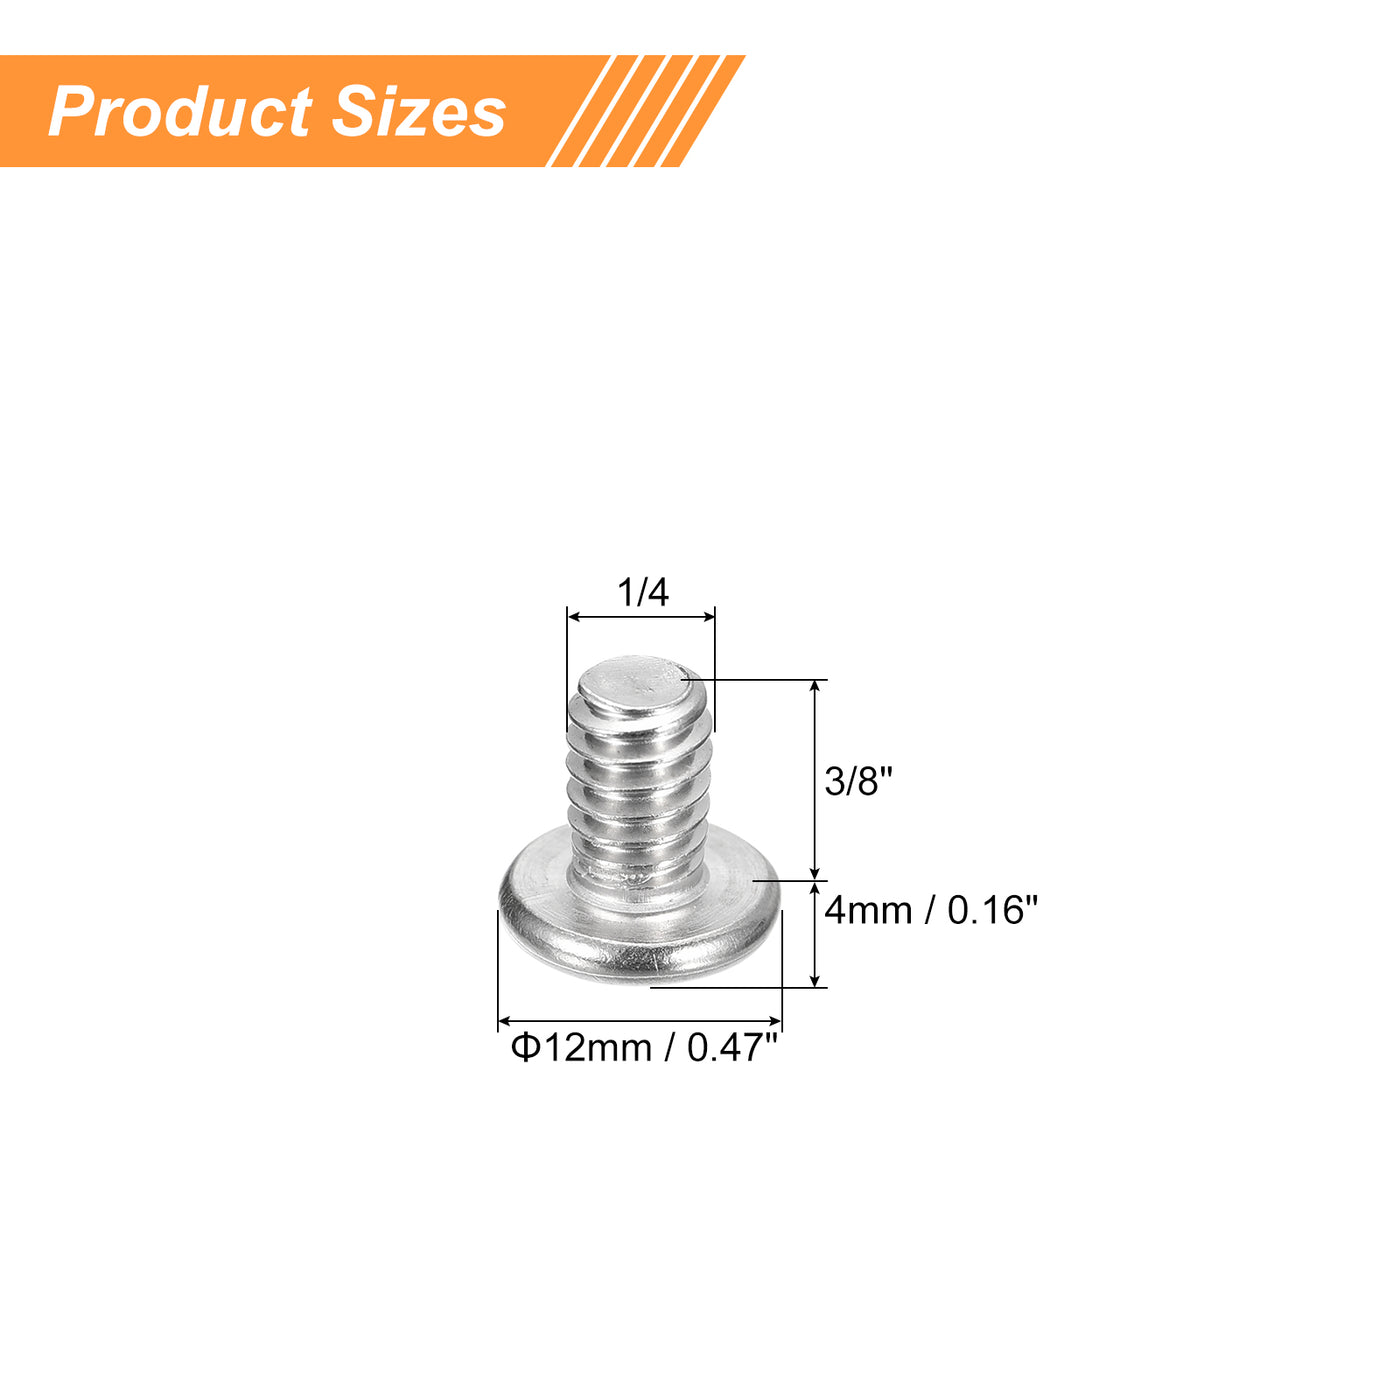 uxcell Uxcell 1/4-20x3/8" Pan Head Machine Screws, Stainless Steel 18-8 Screw, Pack of 20